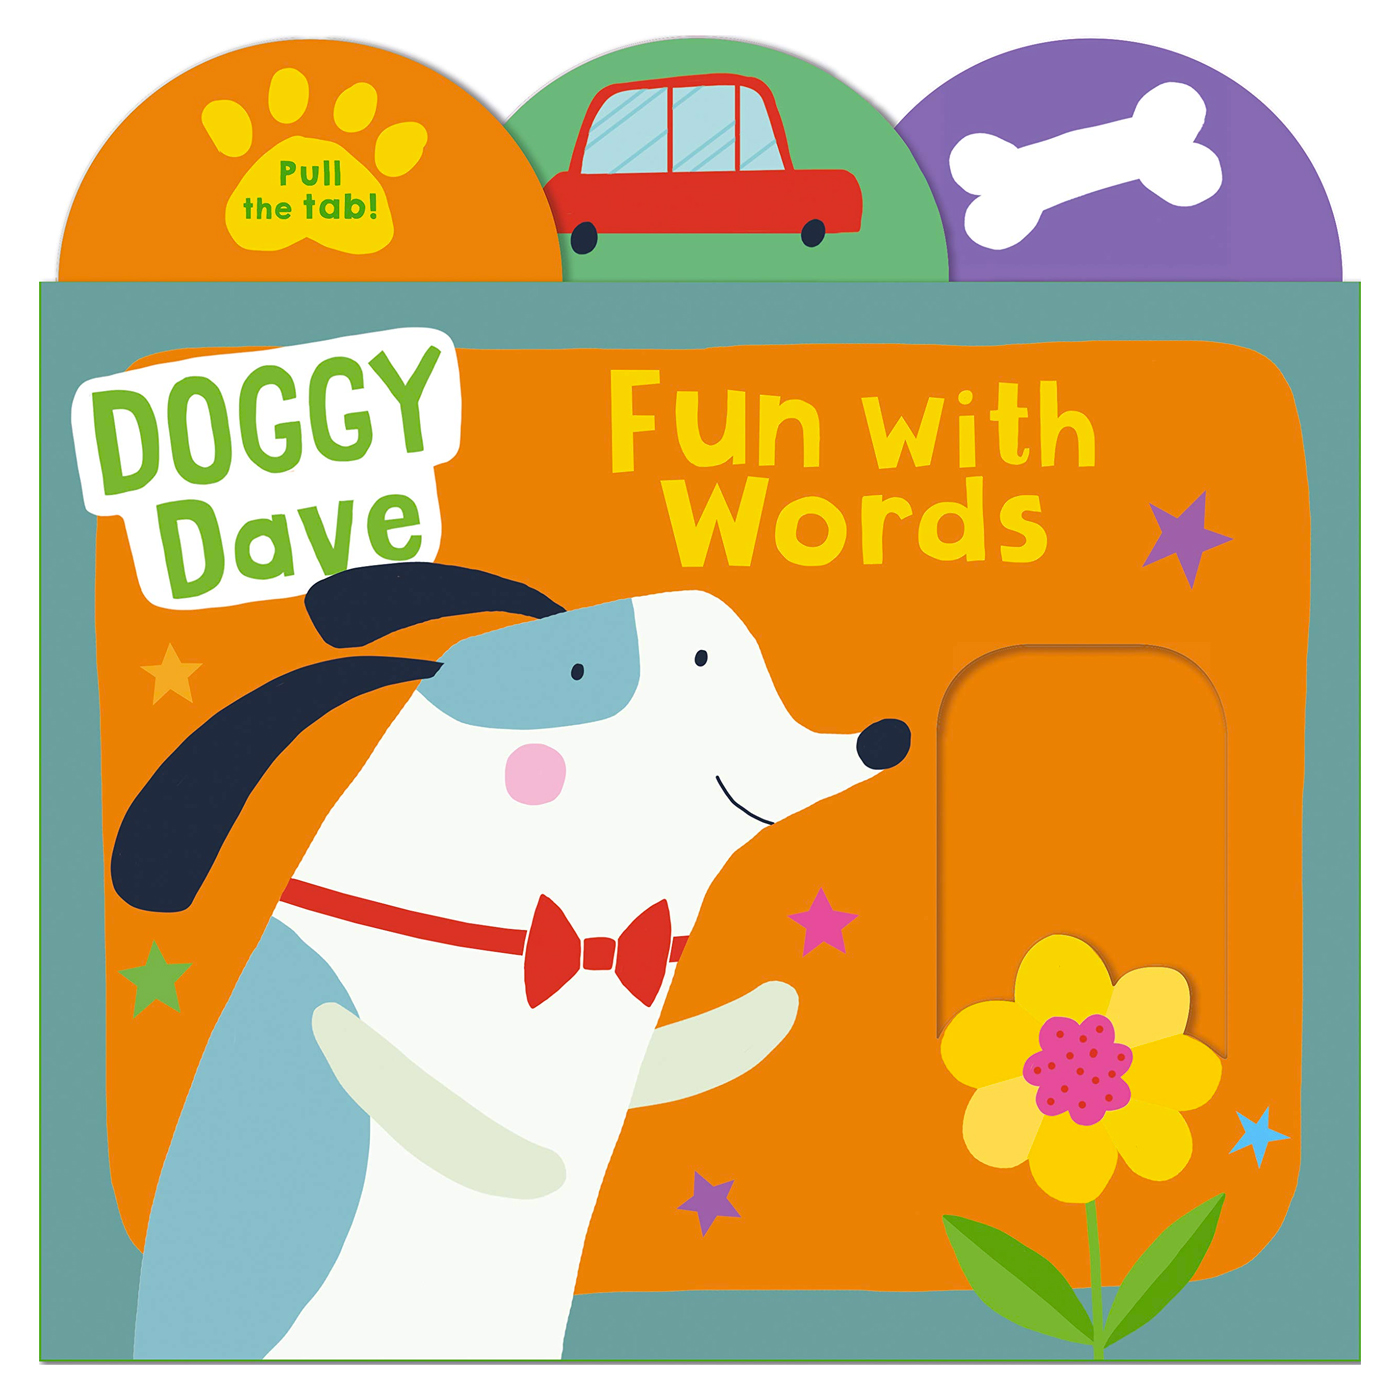  Doggy Dave: Fun With Words